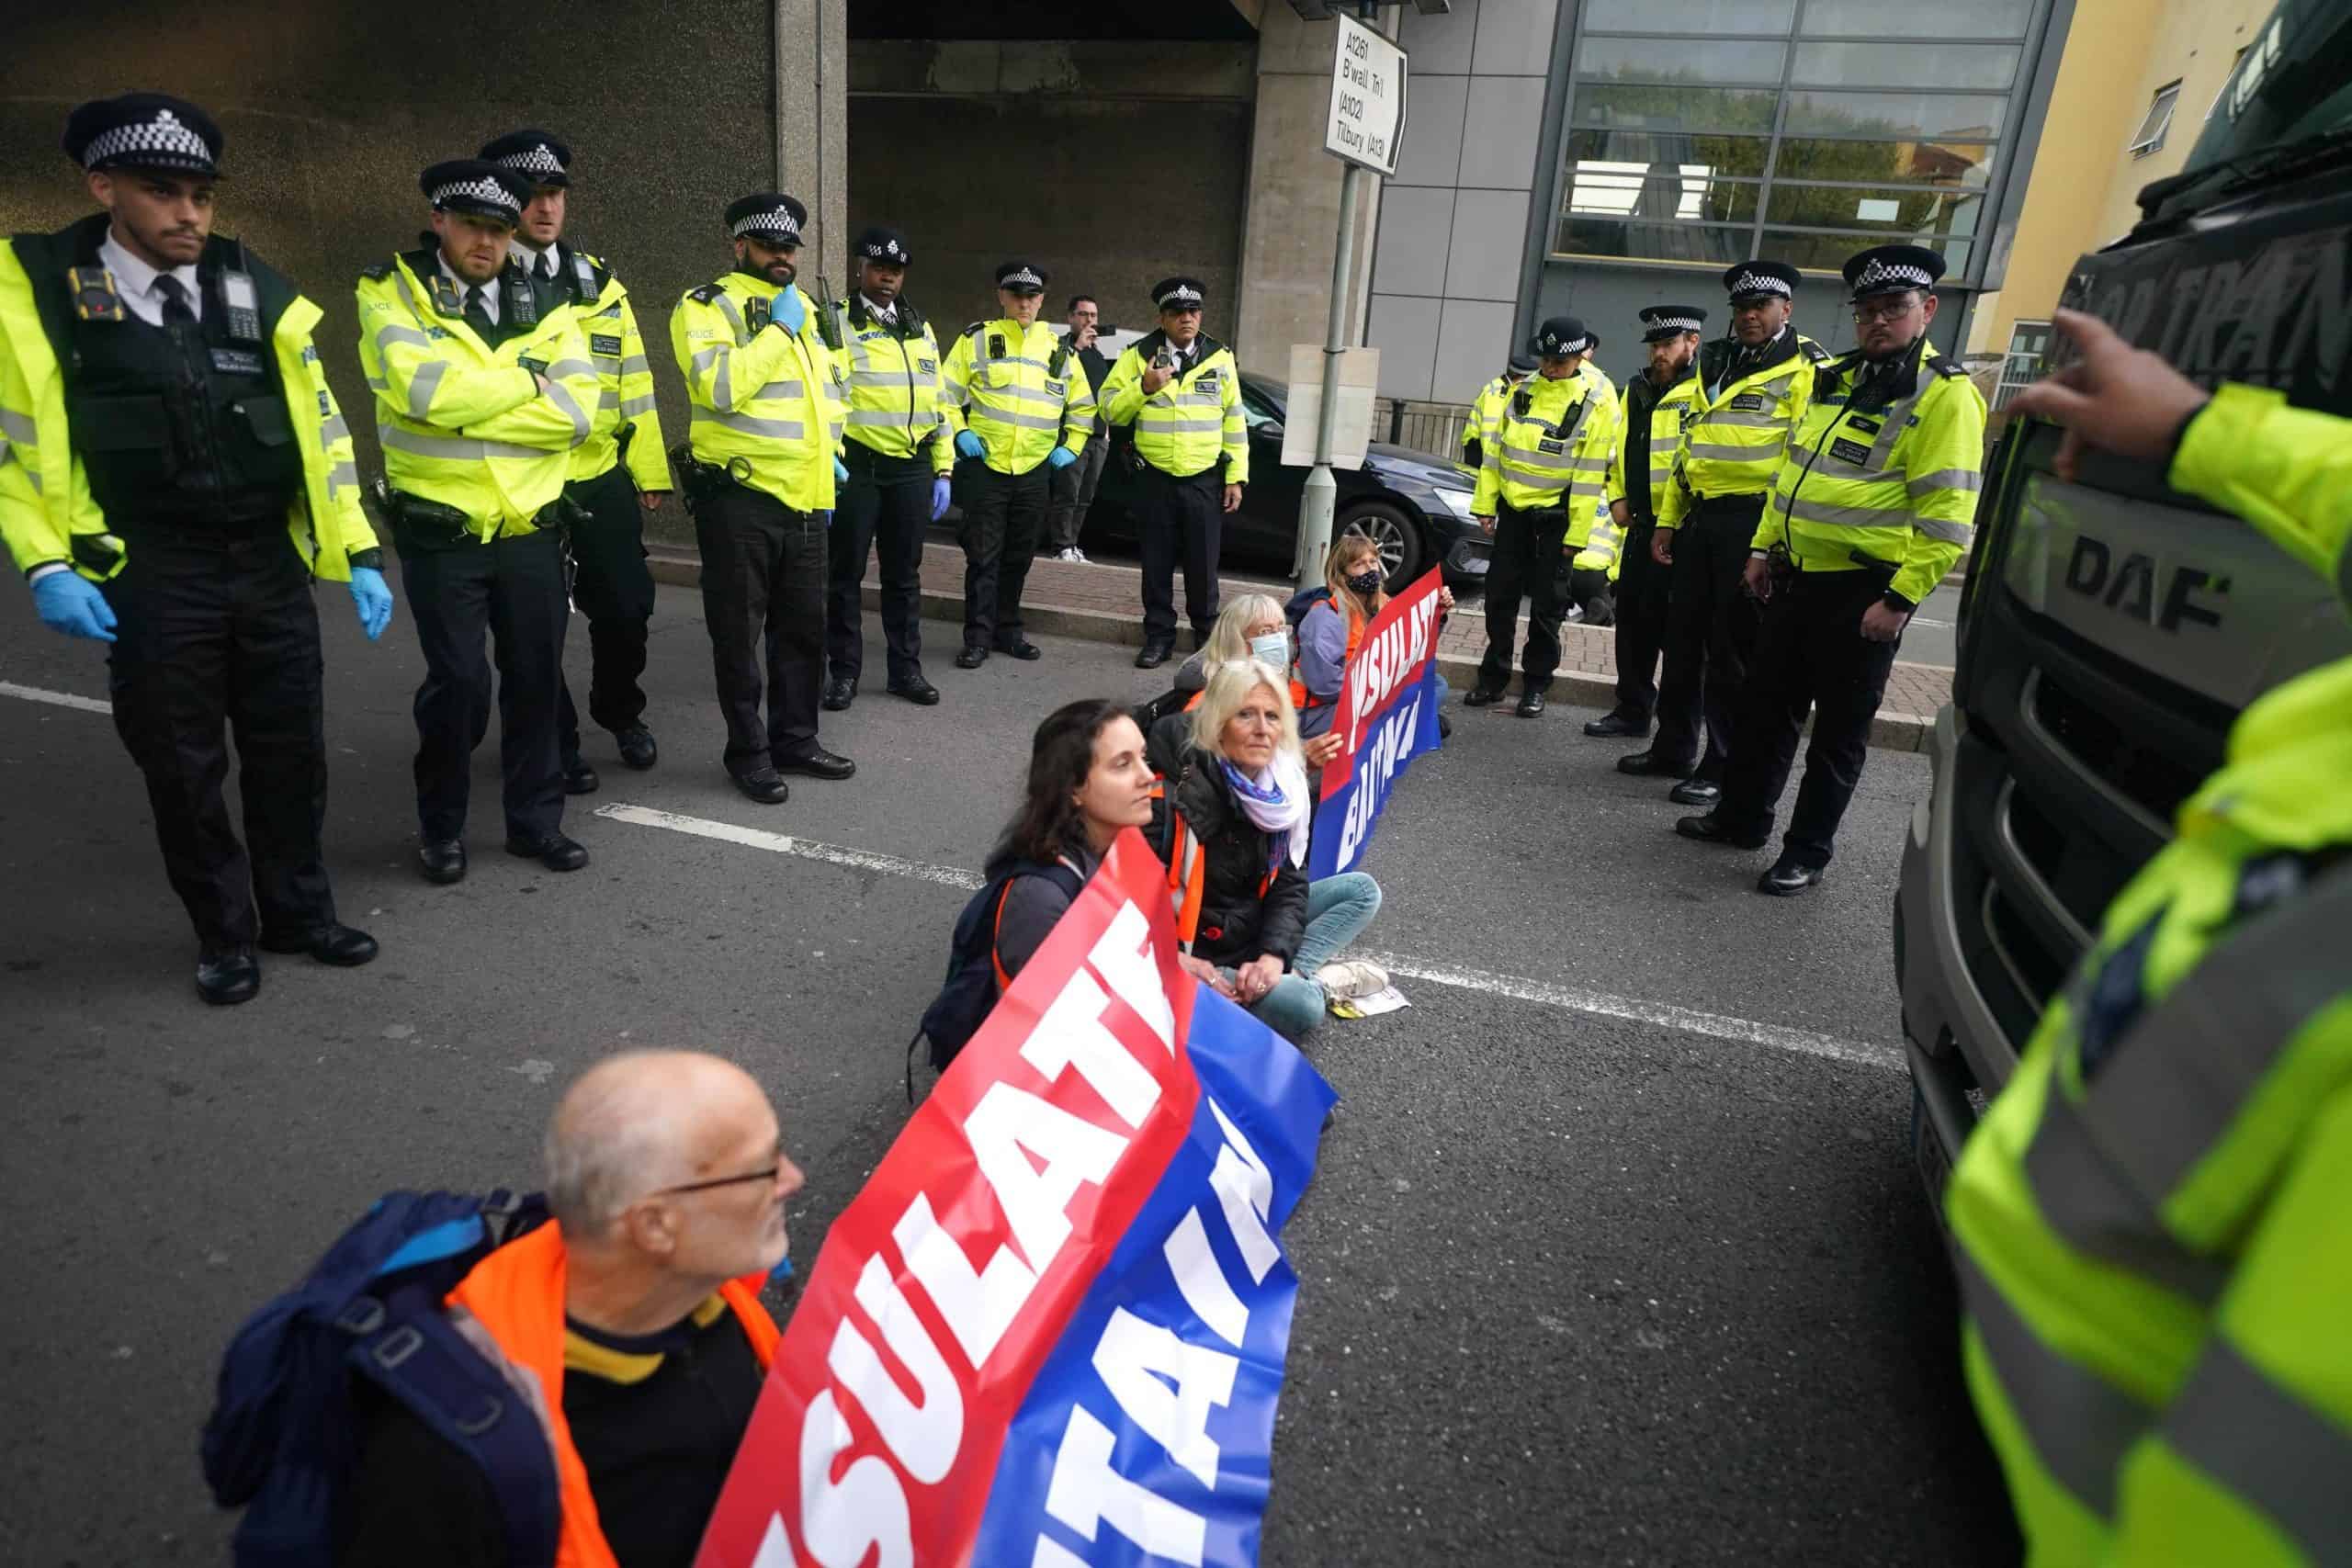 Judge says Insulate Britain protesters ‘inspired him’ as he hands out fines